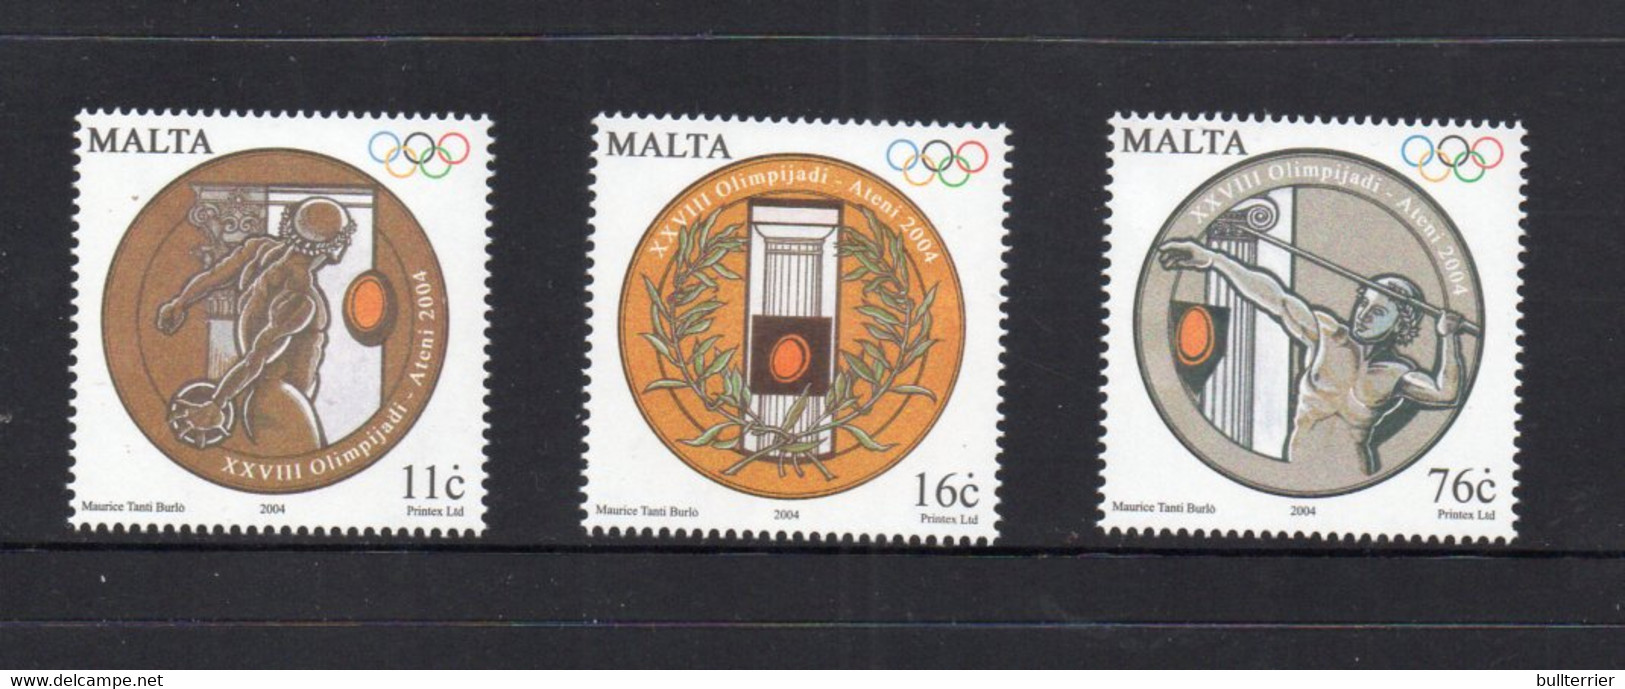 OLYMPICS  - MALTA - 2004 - ATHENS OLYMPICS SET OF 3  MINT NEVER HINGED - Summer 2004: Athens - Paralympic